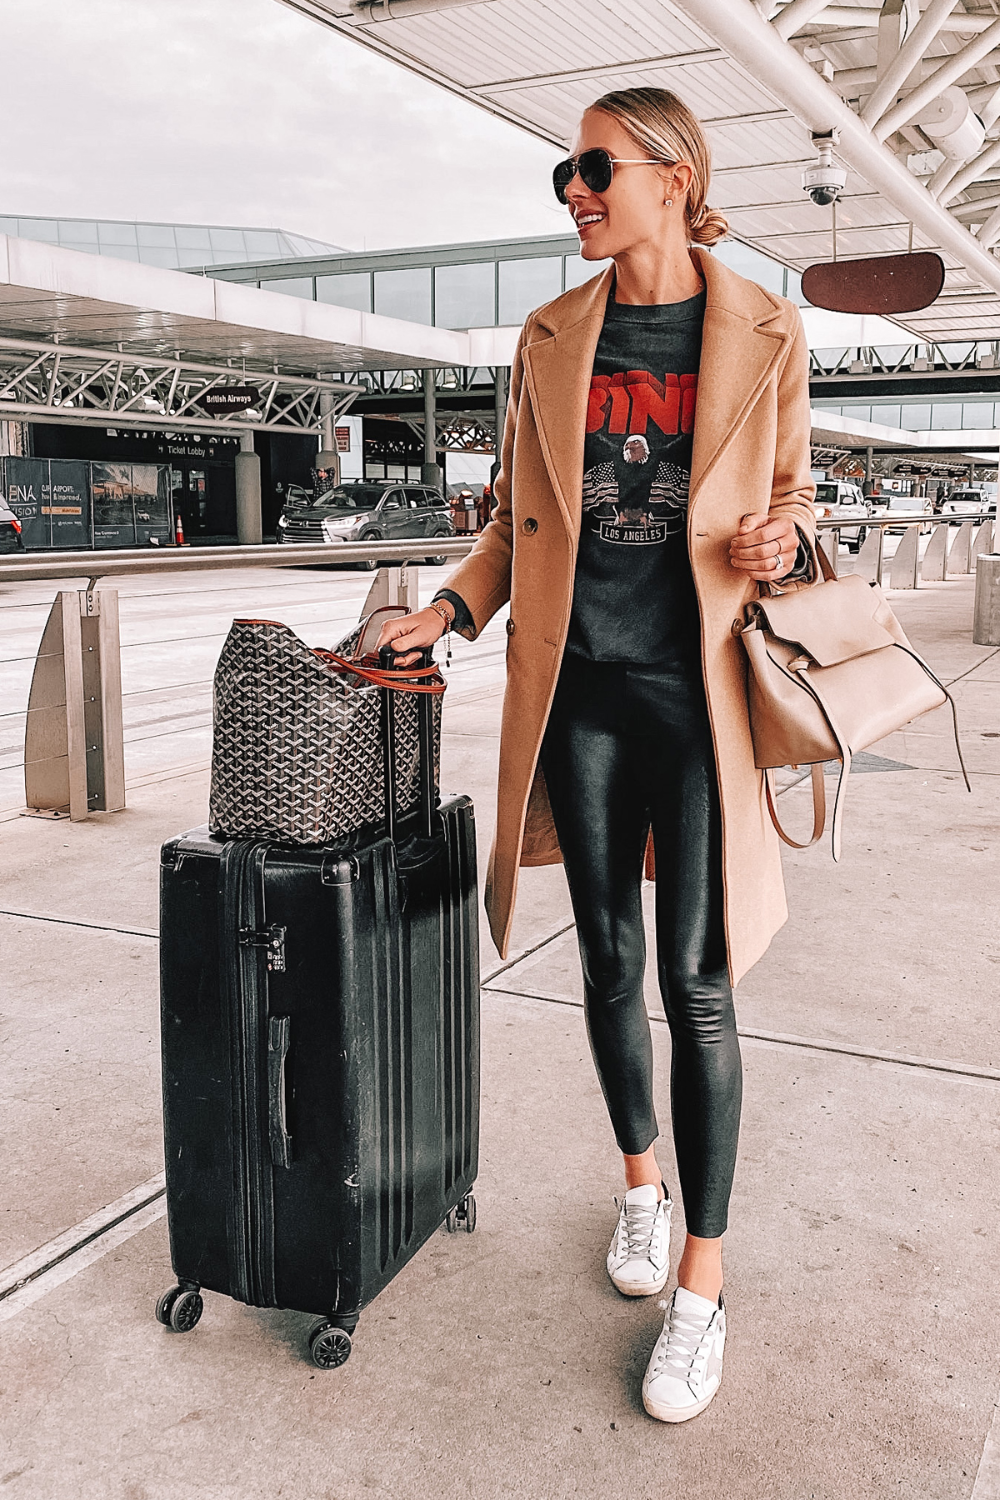 Fashion & Travel: How to Look Stylish While Traveling - Travels in  Translation